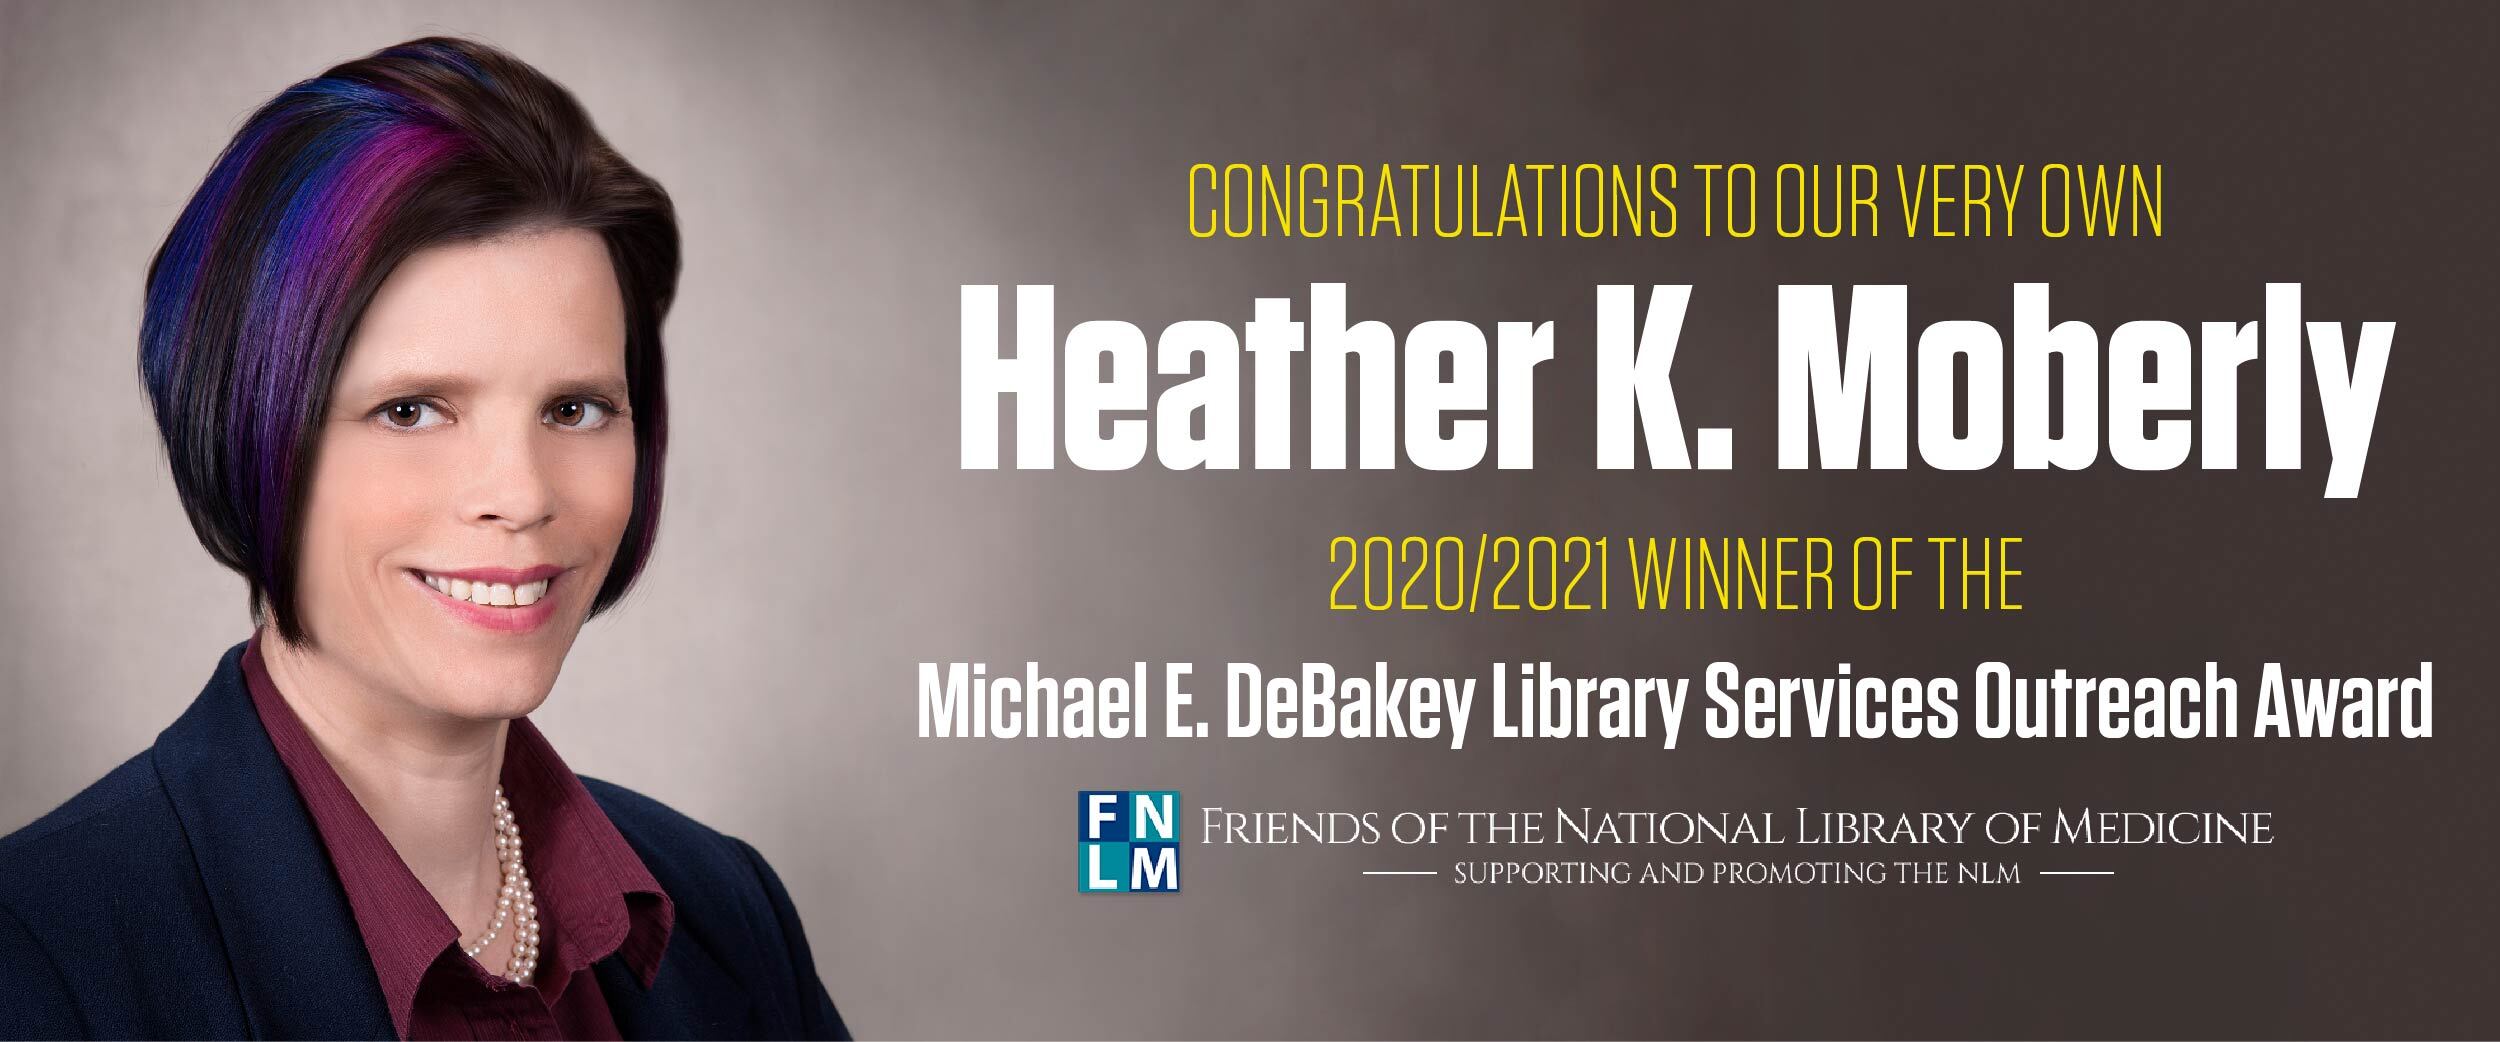 Congratulations to our very own Heather K. Moberly, 2020/2021 winner of the Michael E. DeBakey Library Services Outreach Award, presented by the Friends of the National Library of Medicine - Supporting and Promoting the NLM.